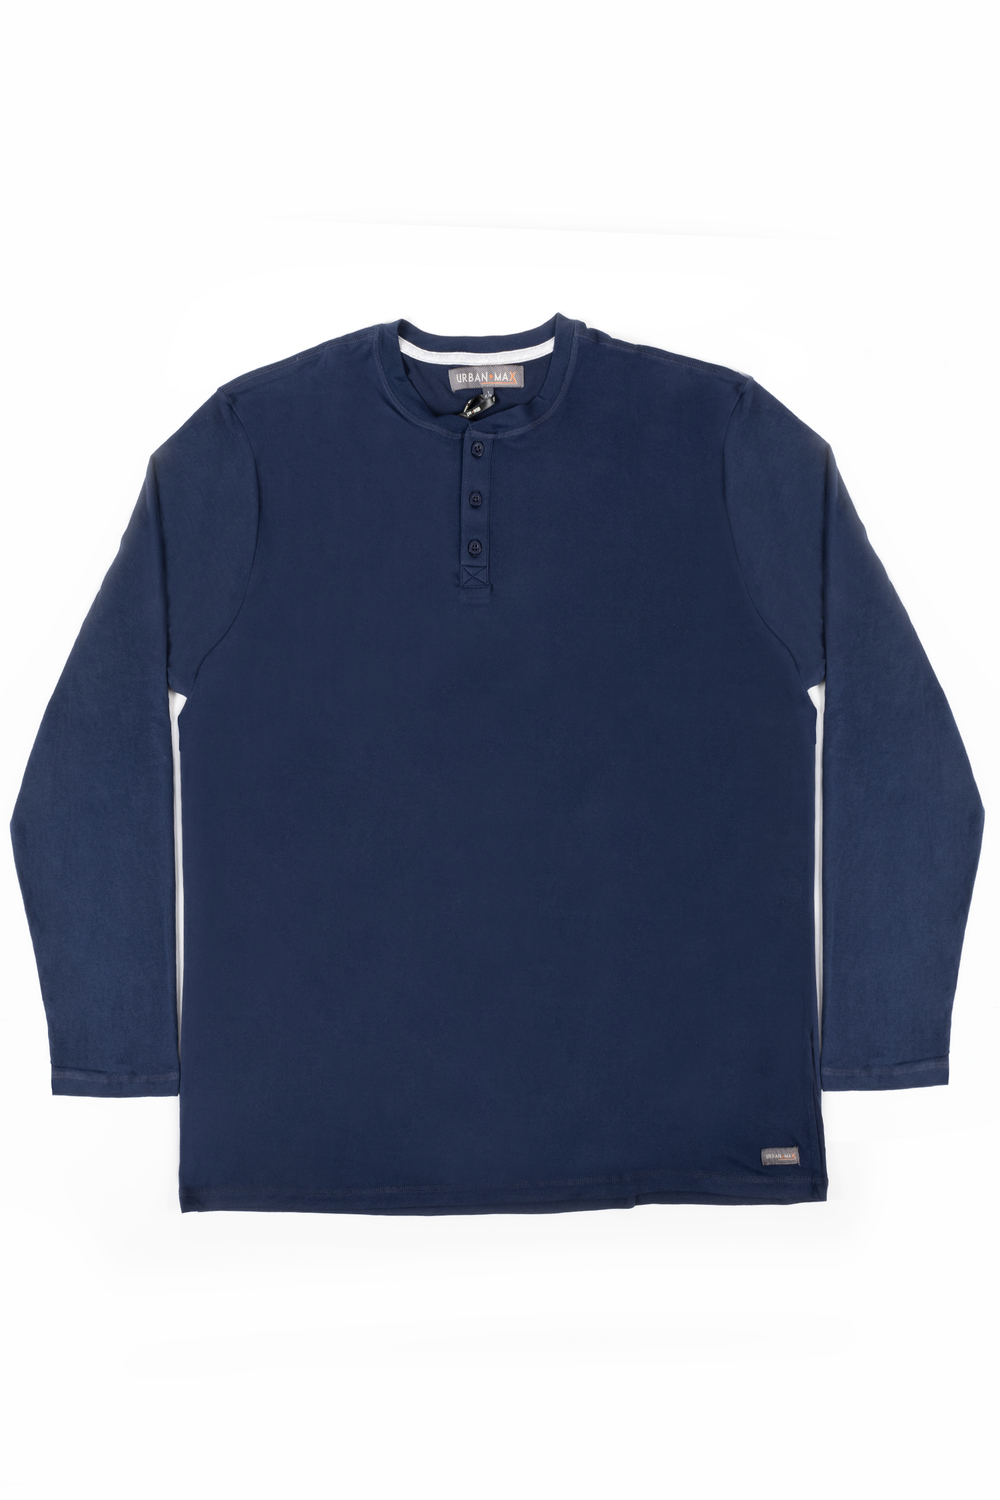 Long sleeve jersey knit shirt for men - Navy - Plus Size